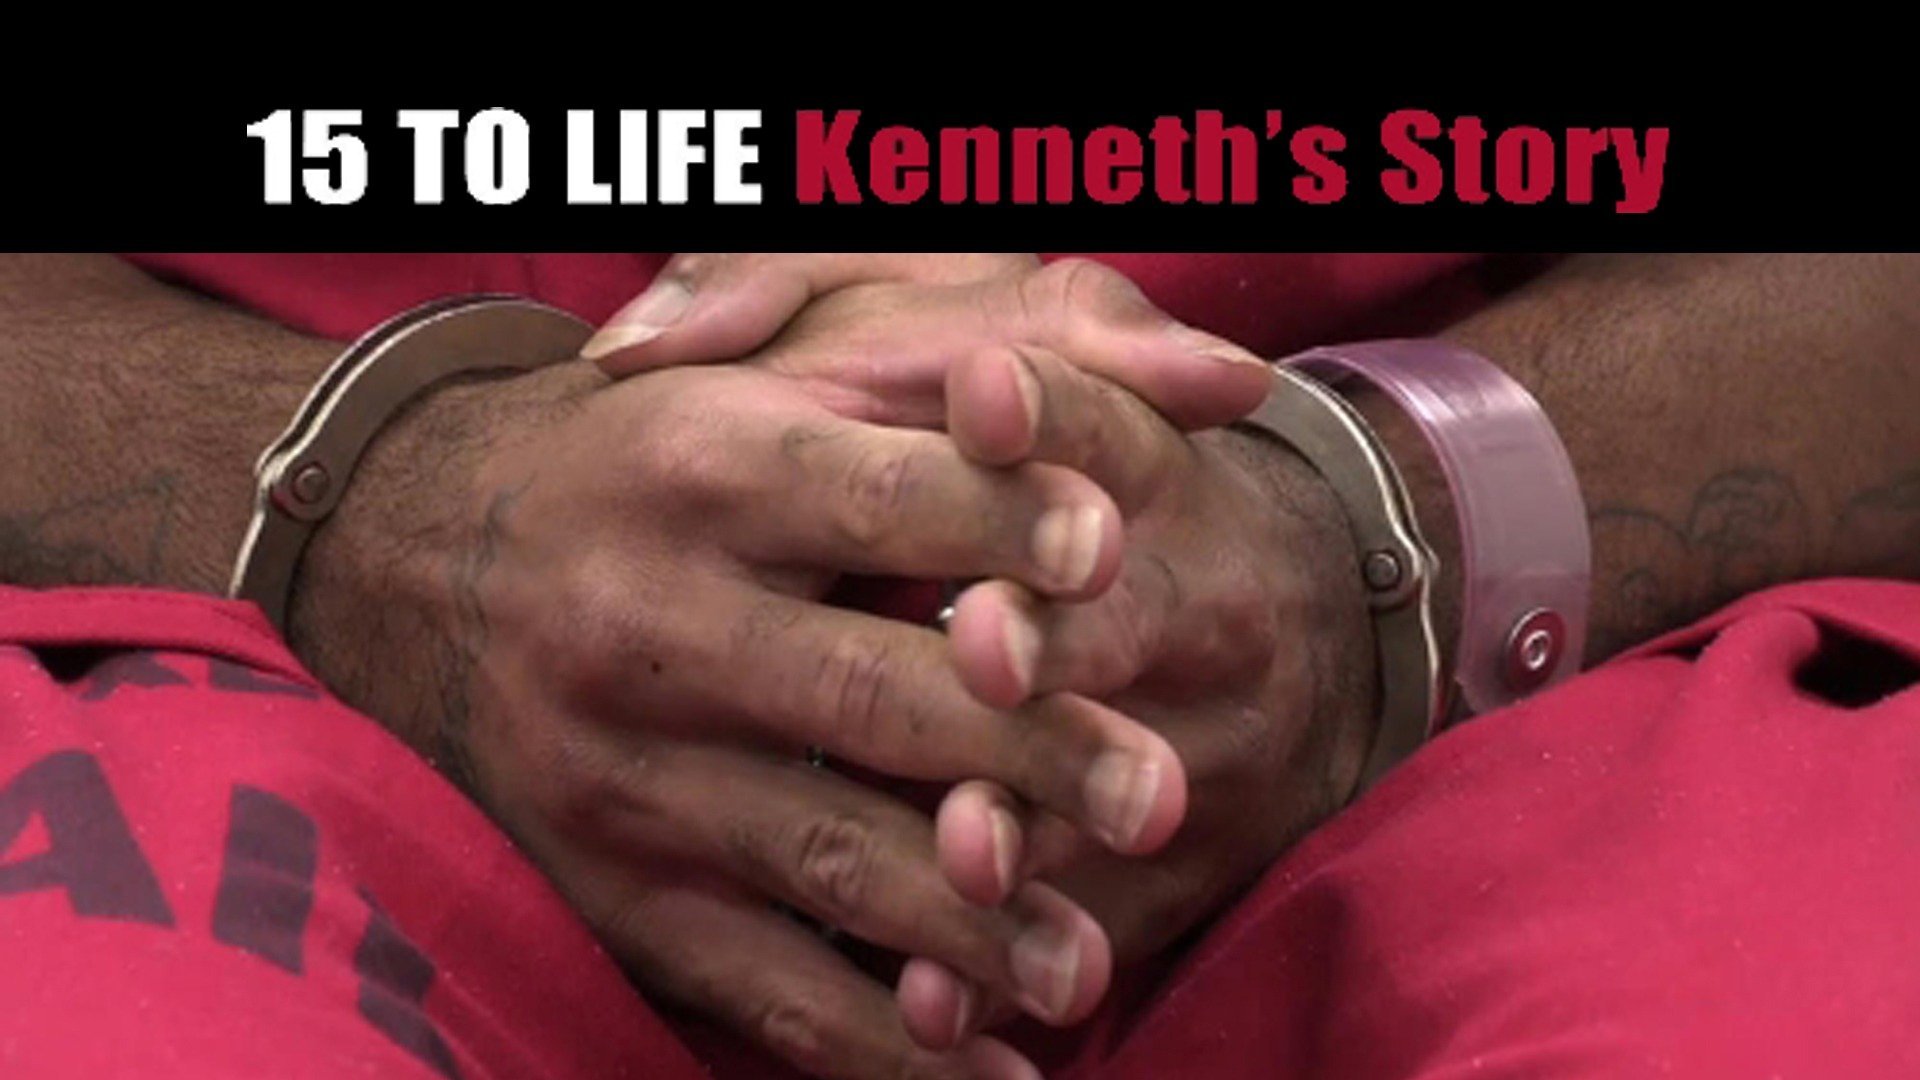 15 To Life: Kenneth’s Story